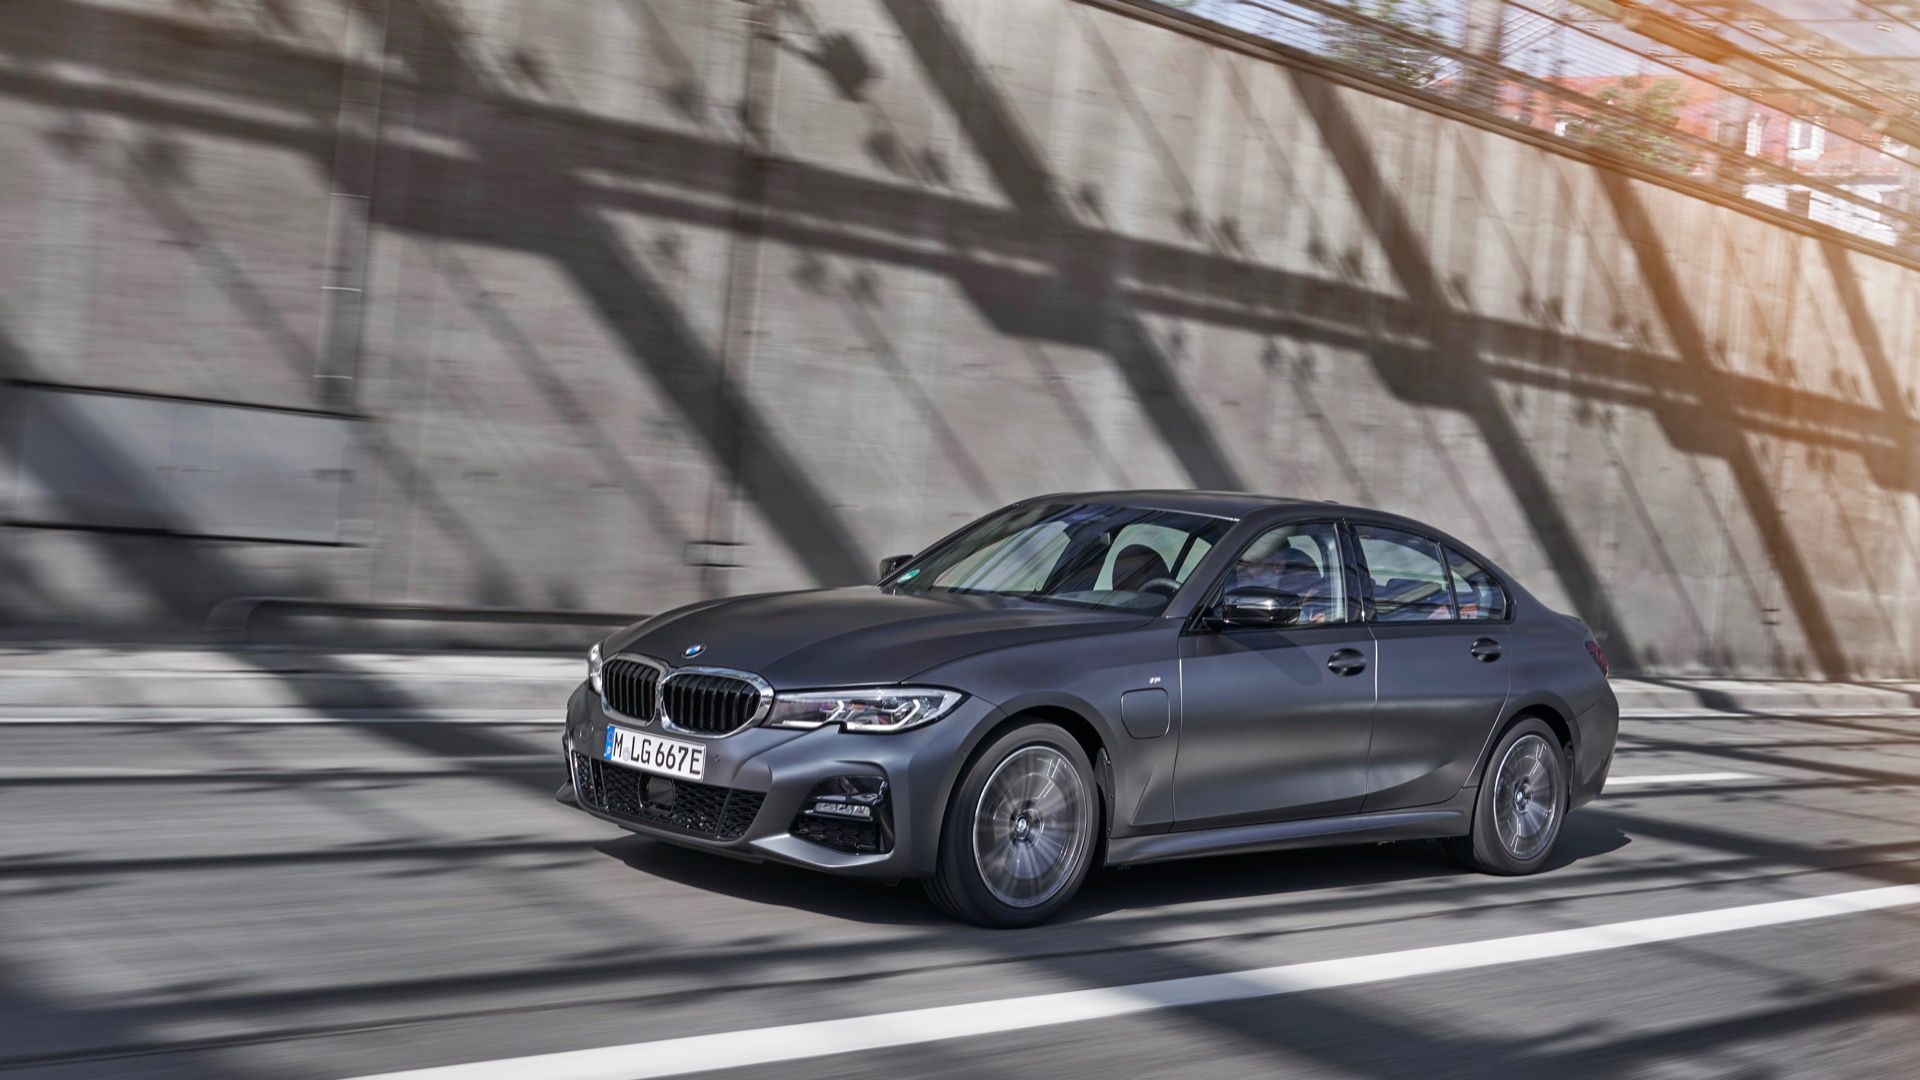 2021 BMW 330e and 330e xDrive PHEVs revealed with 20 miles of electric